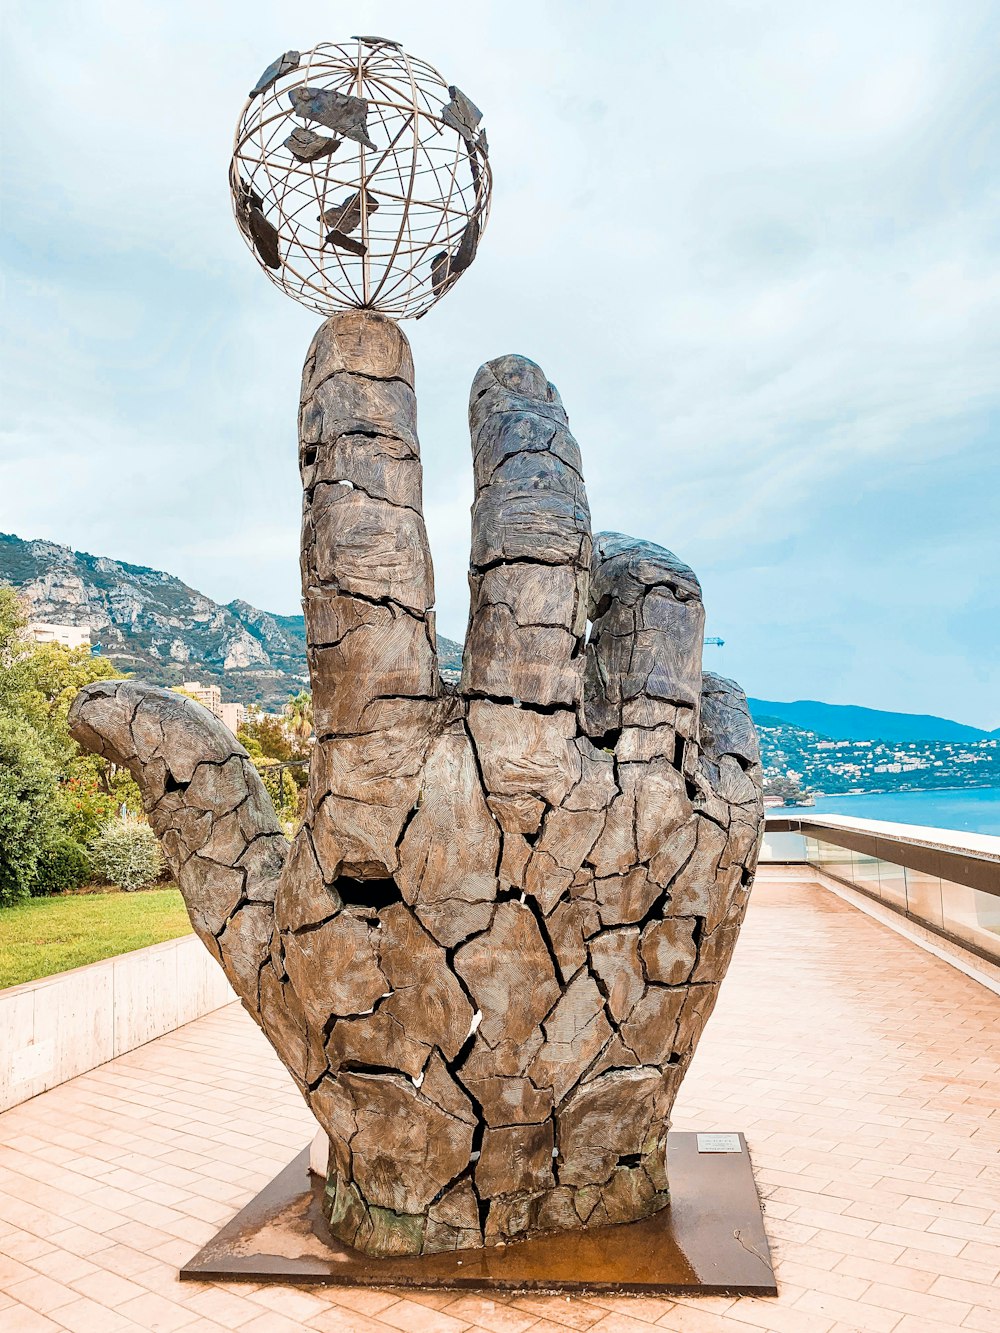 a sculpture of a hand with a globe on top of it